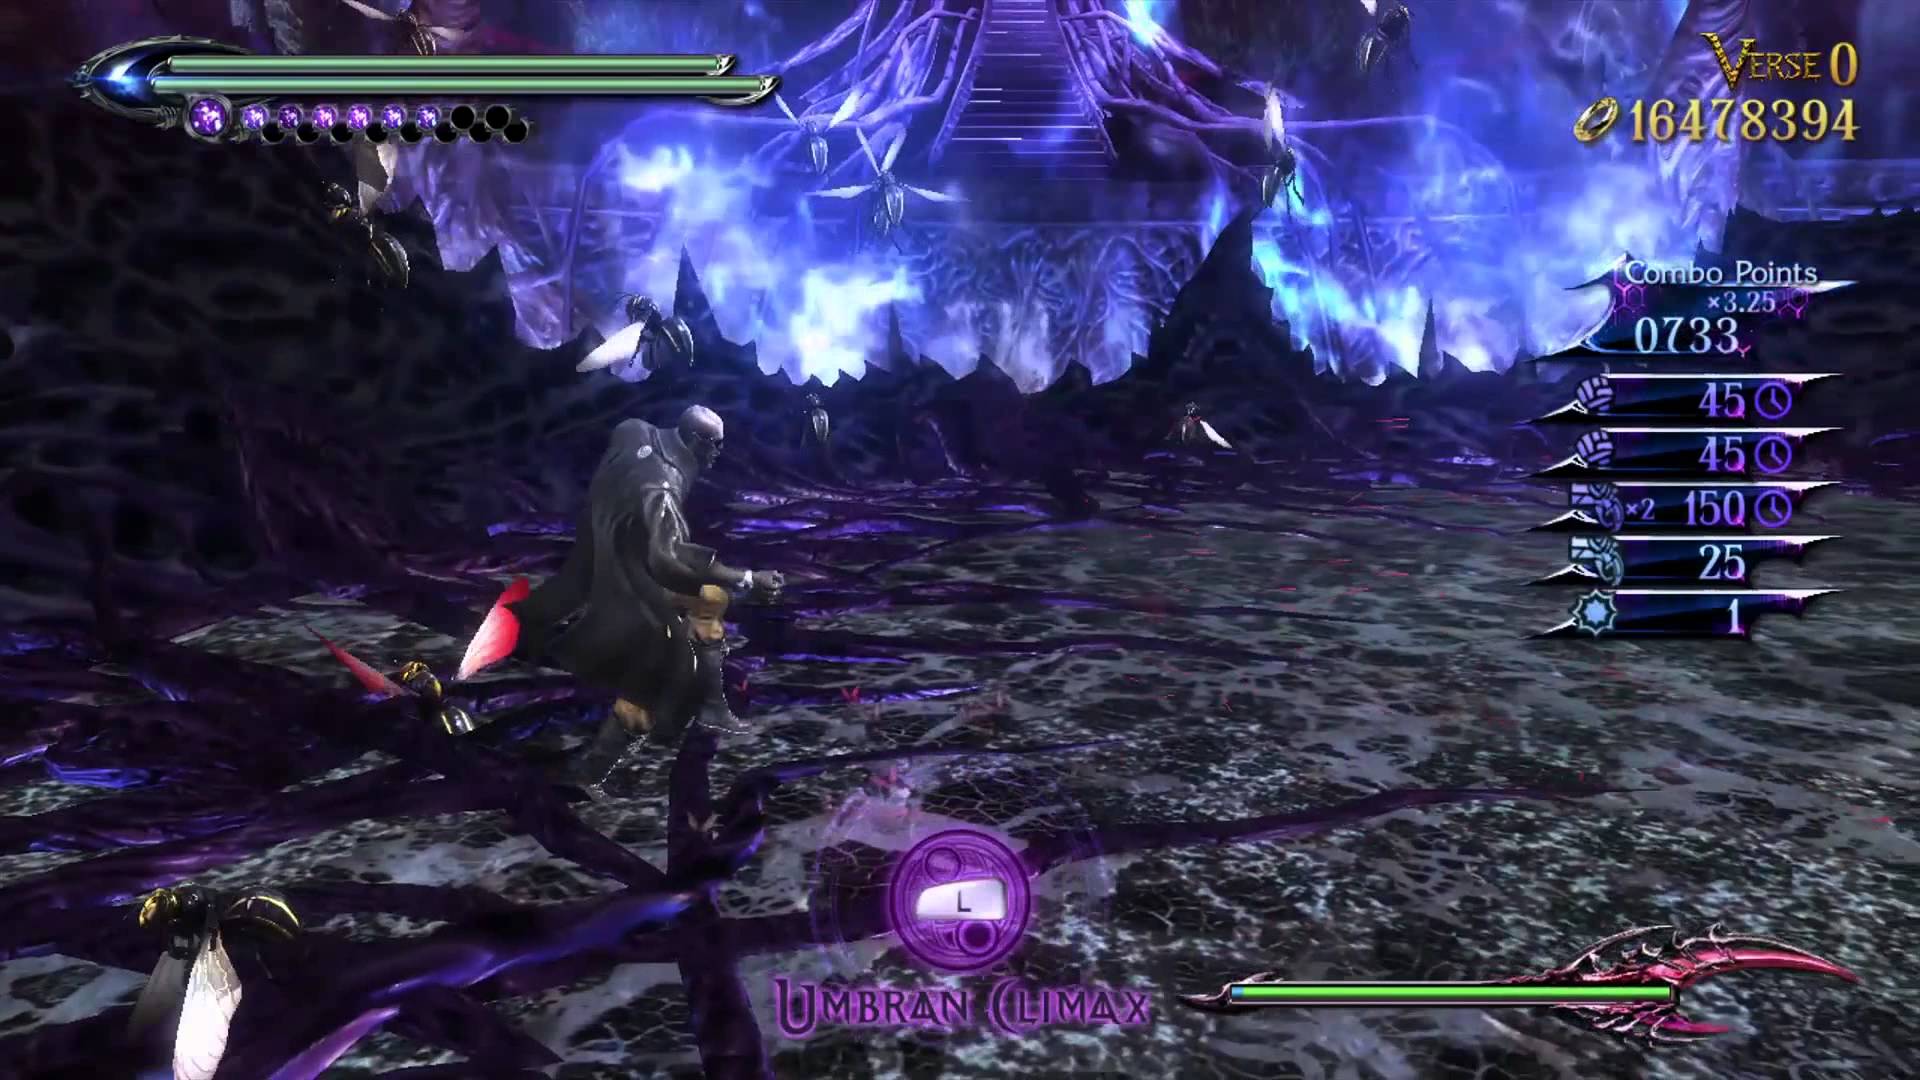 Bayonetta 2 How Long to Beat: How Many Chapters in Bayonetta 2? -  GameRevolution